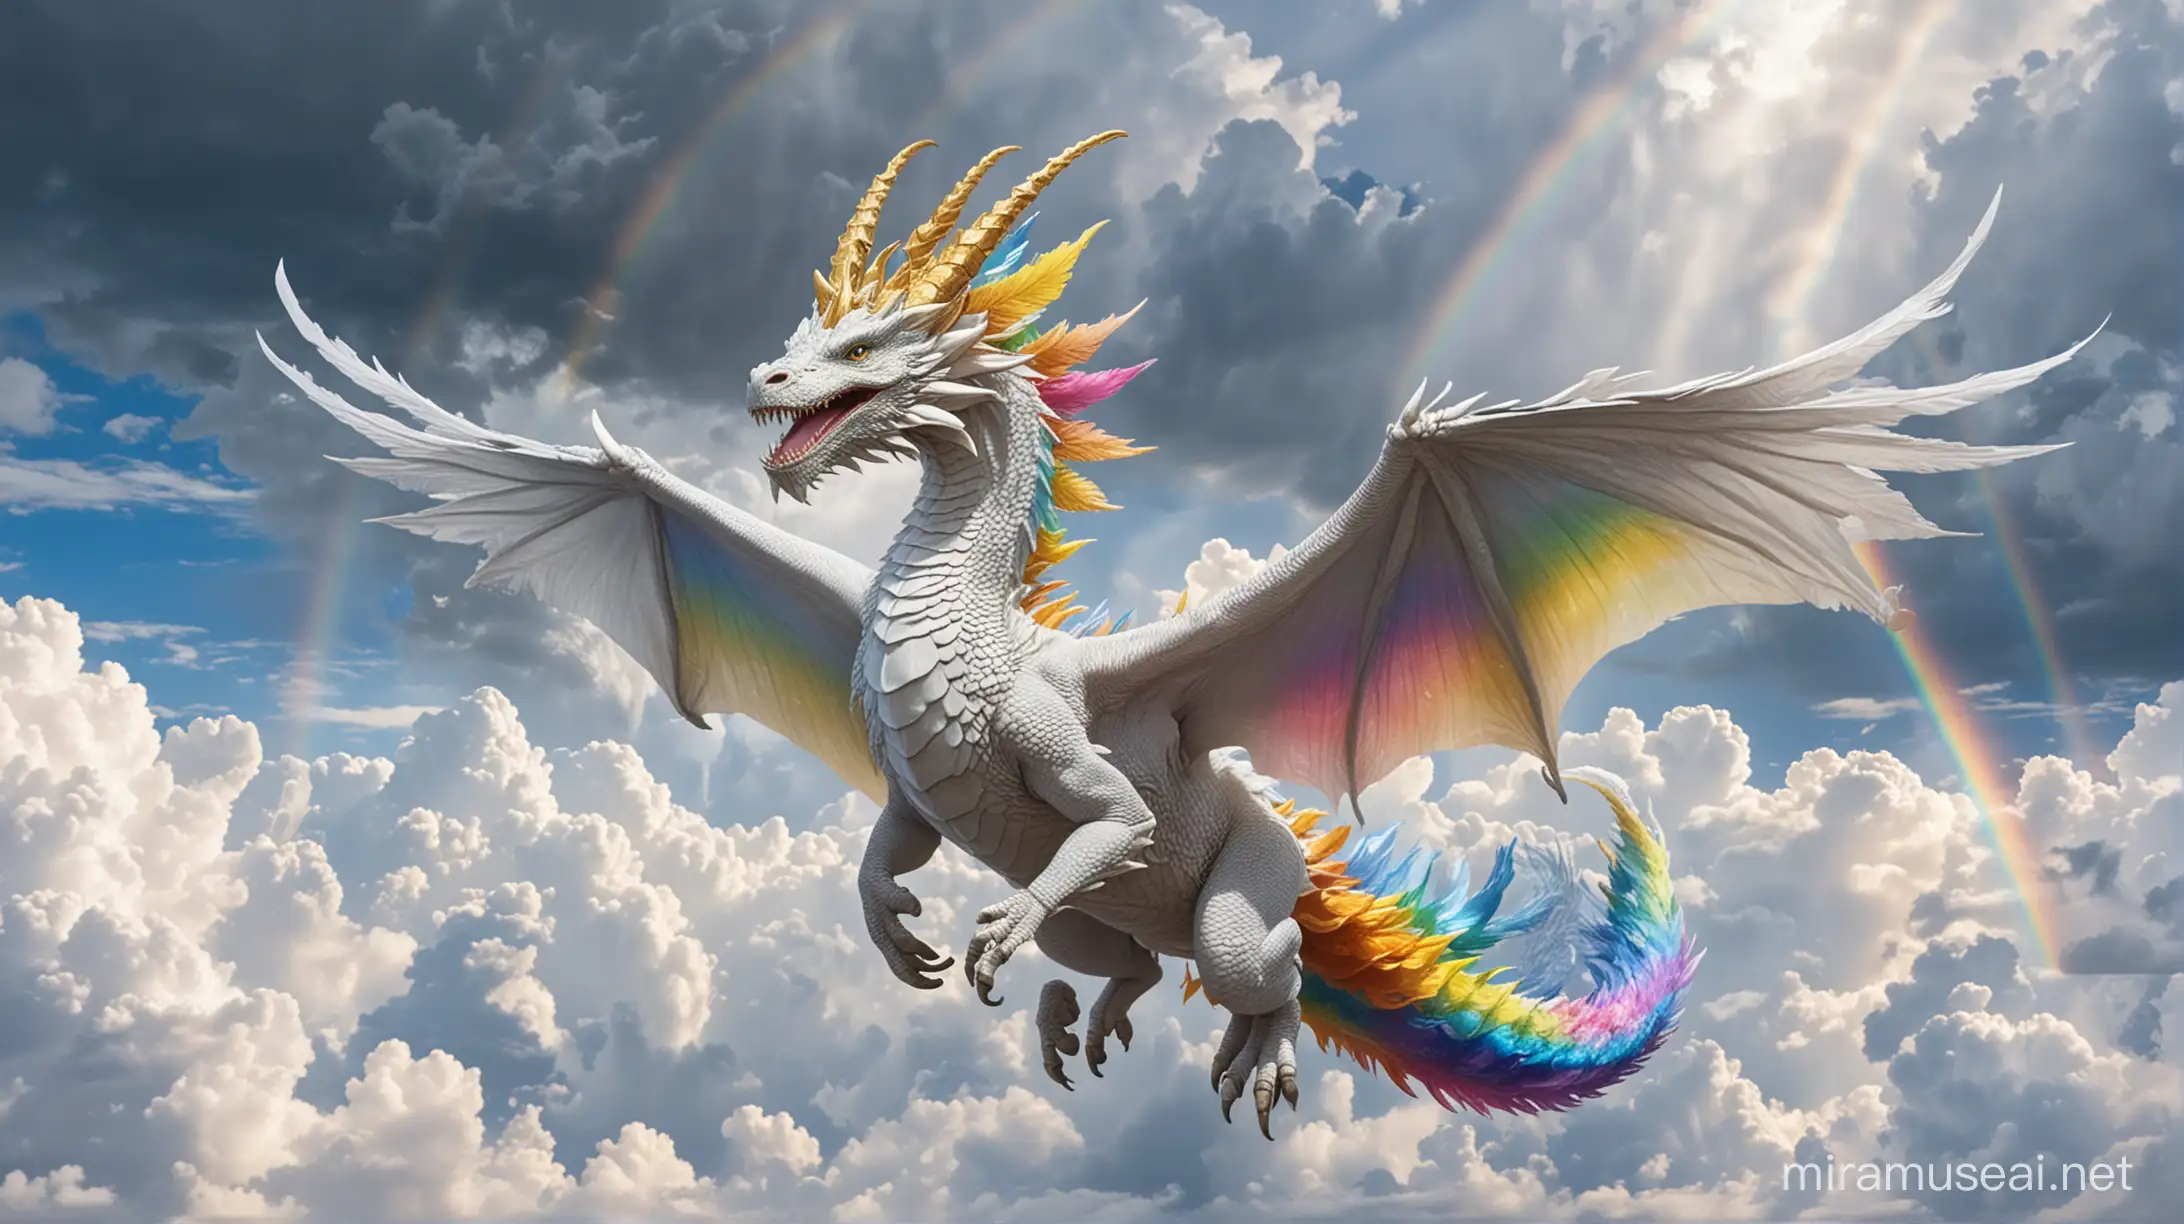 Majestic WhiteWinged Dragon Soaring Amidst Rainbow Clouds